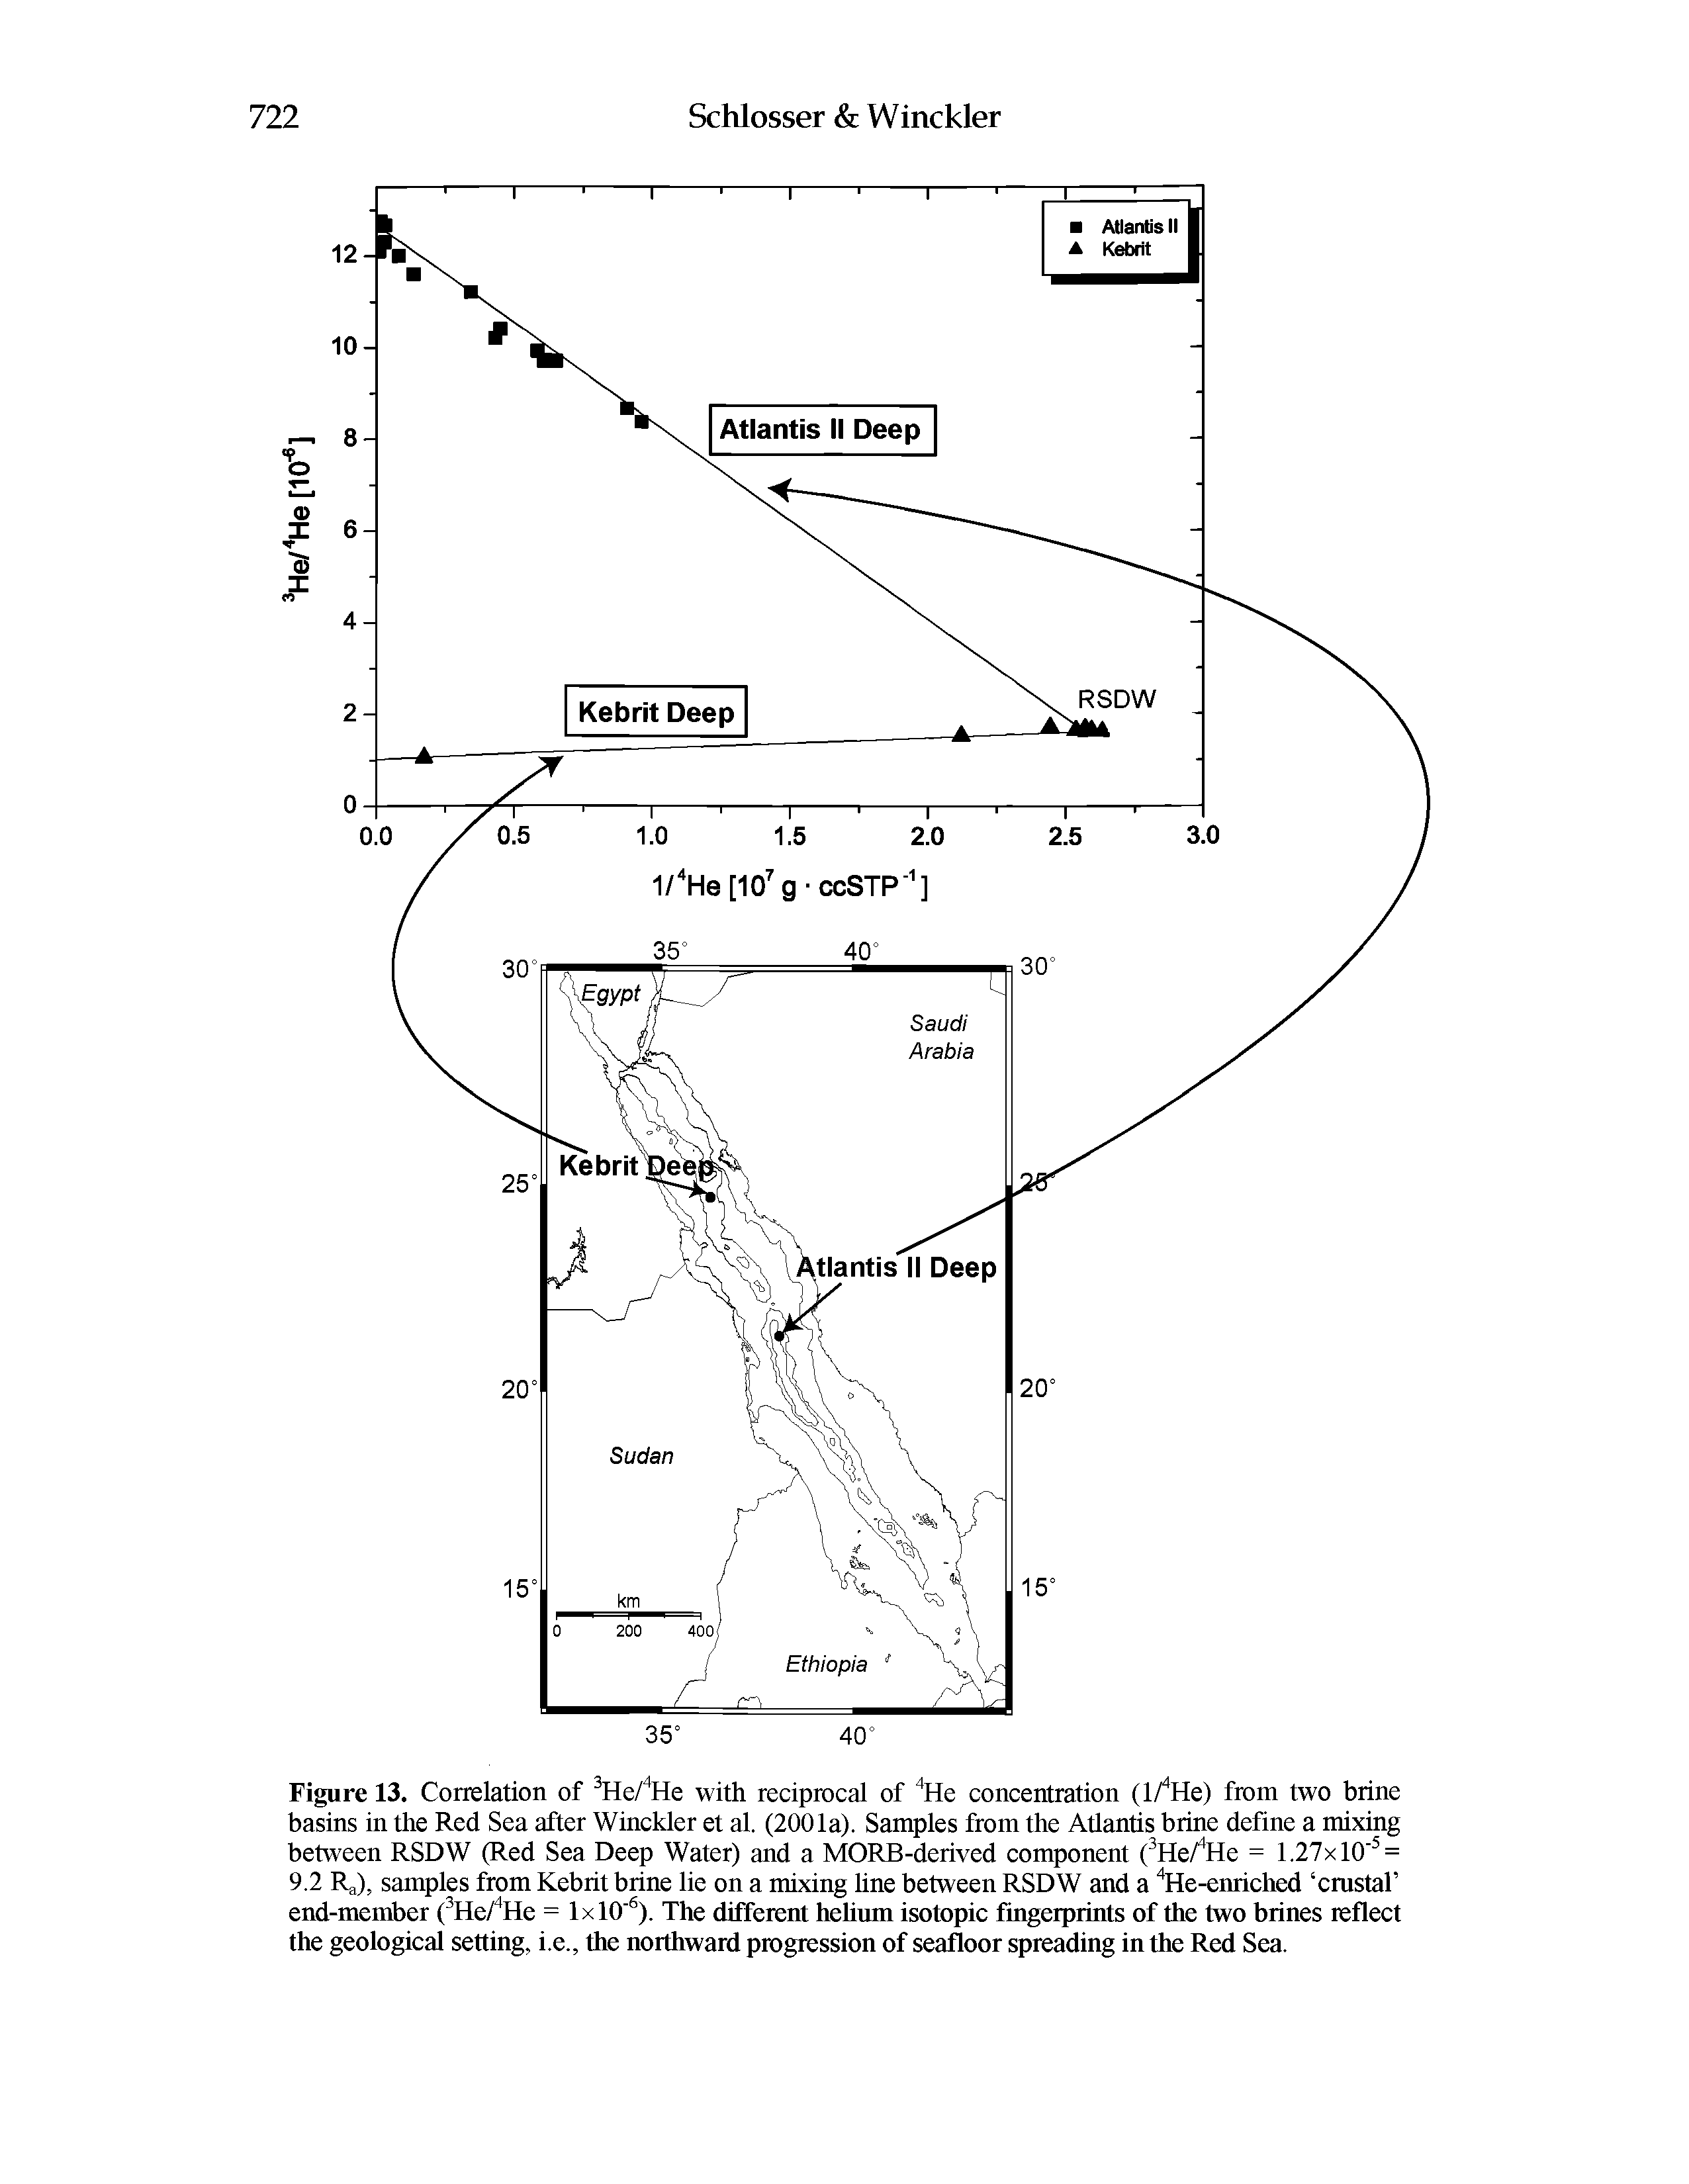 Figure 13. Correlation of He/" He with reciprocal of " He concentration (l/" He) from two brine basins in the Red Sea after Winckler et al. (2001a). Samples from the Atlantis brine define a mixing between RSDW (Red Sea Deep Water) and a MORB-derived component ( He/ He = 1.27x10 = 9.2 Ra), samples from Kebrit brine lie on a mixing line between RSDW and a " He-emiched crustal end-member ( He/ He = 1x10 ). The different hehum isotopic fingerprints of the two brines reflect the geological setting, i.e., the northward progression of seafloor spreading in the Red Sea.